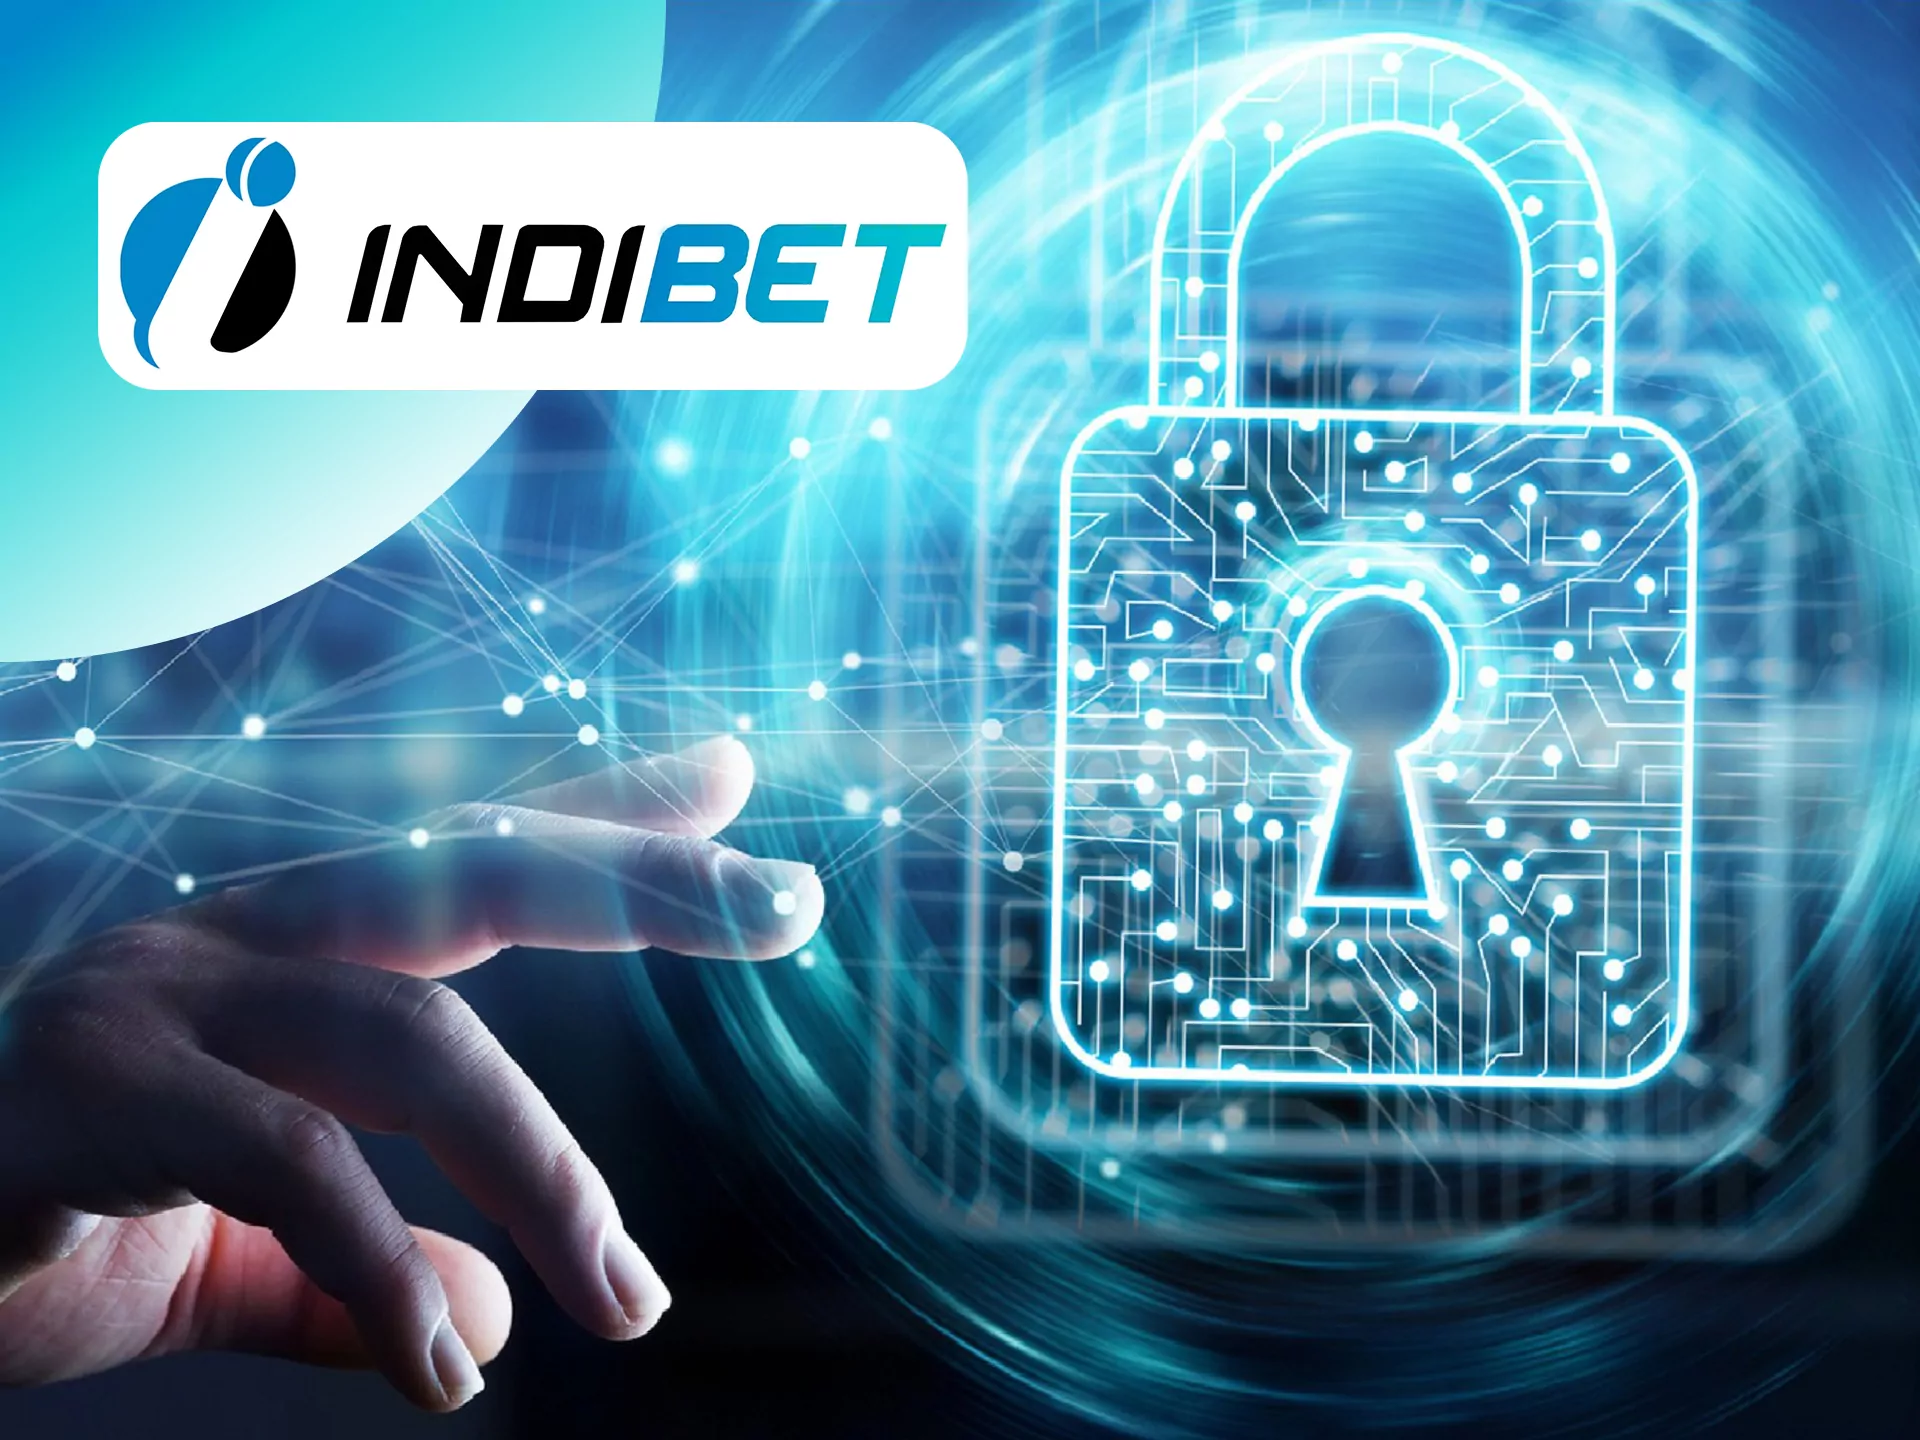 Your personal information is safe at Indibet.